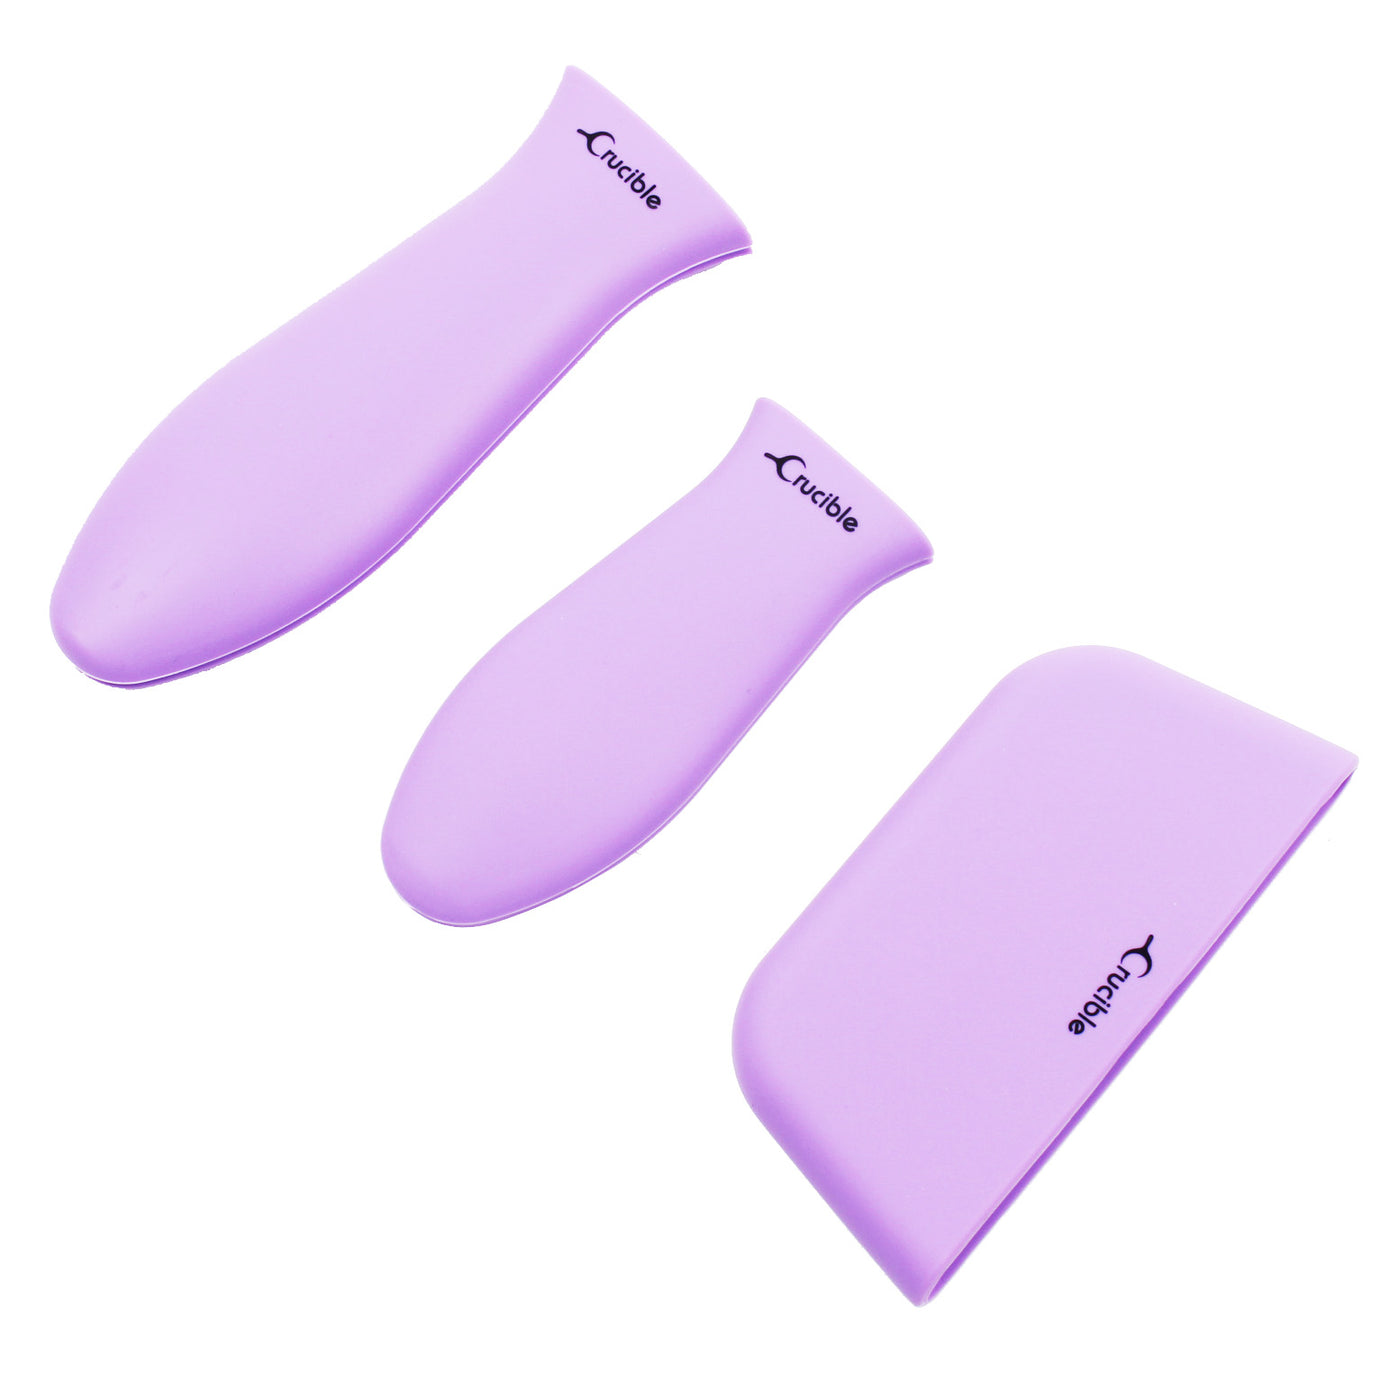 Silicone Potholders (3-Pack Mix Purple) for Cast Iron Skillet